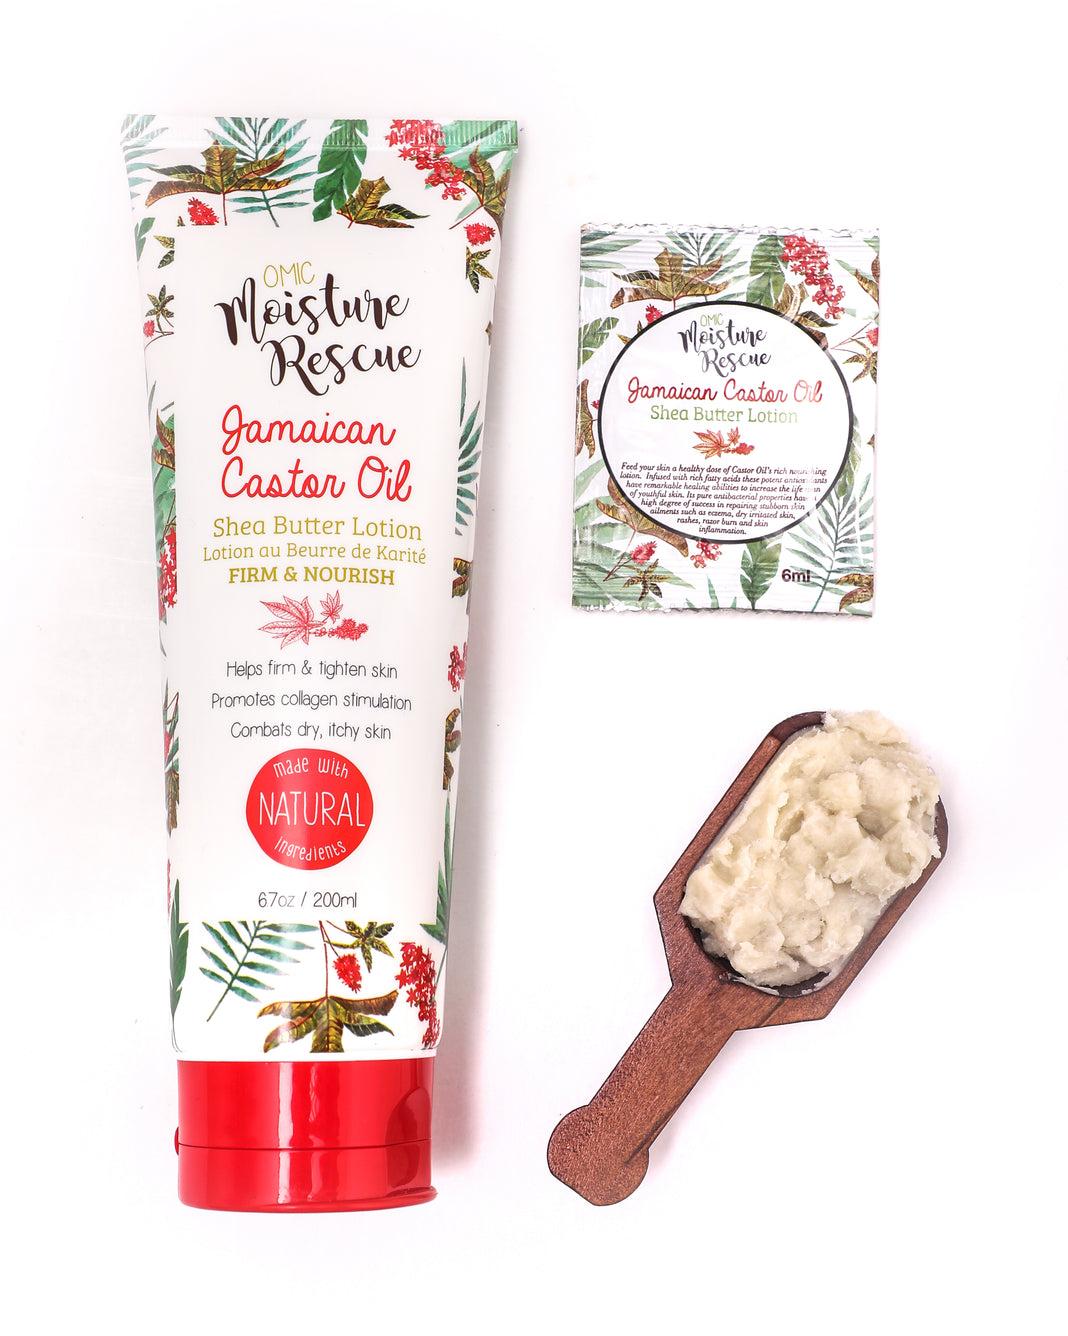 Moisture Rescue Shea Butter Lotion Tube  with Jamaican Castor Oil Mitchell Brands - Mitchell Brands - Skin Lightening, Skin Brightening, Fade Dark Spots, Shea Butter, Hair Growth Products